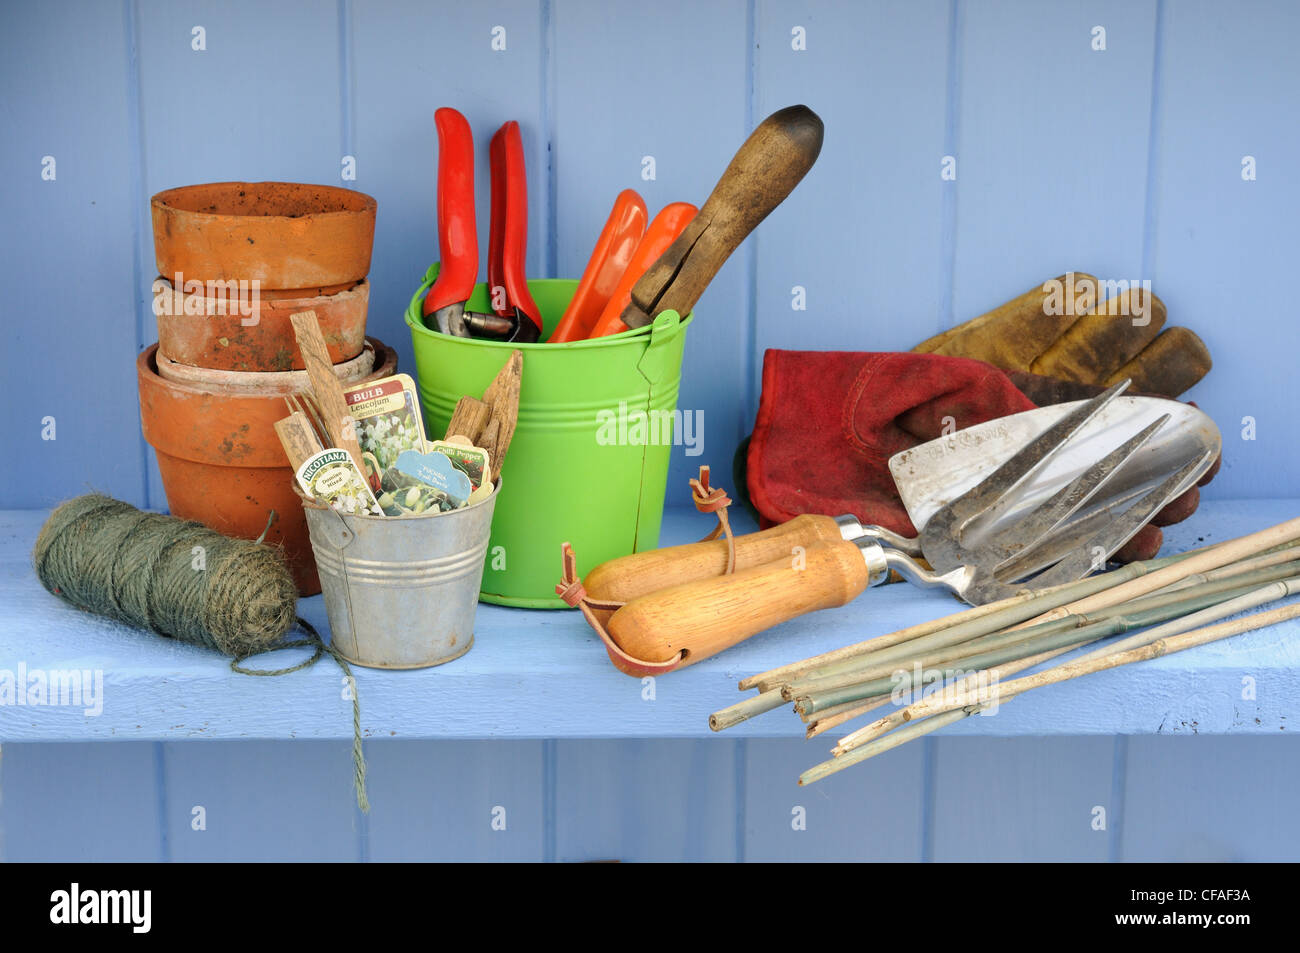 Springtime potting shed scene with shelf containing colourful garden buckets and gardening bits and pieces. Stock Photo